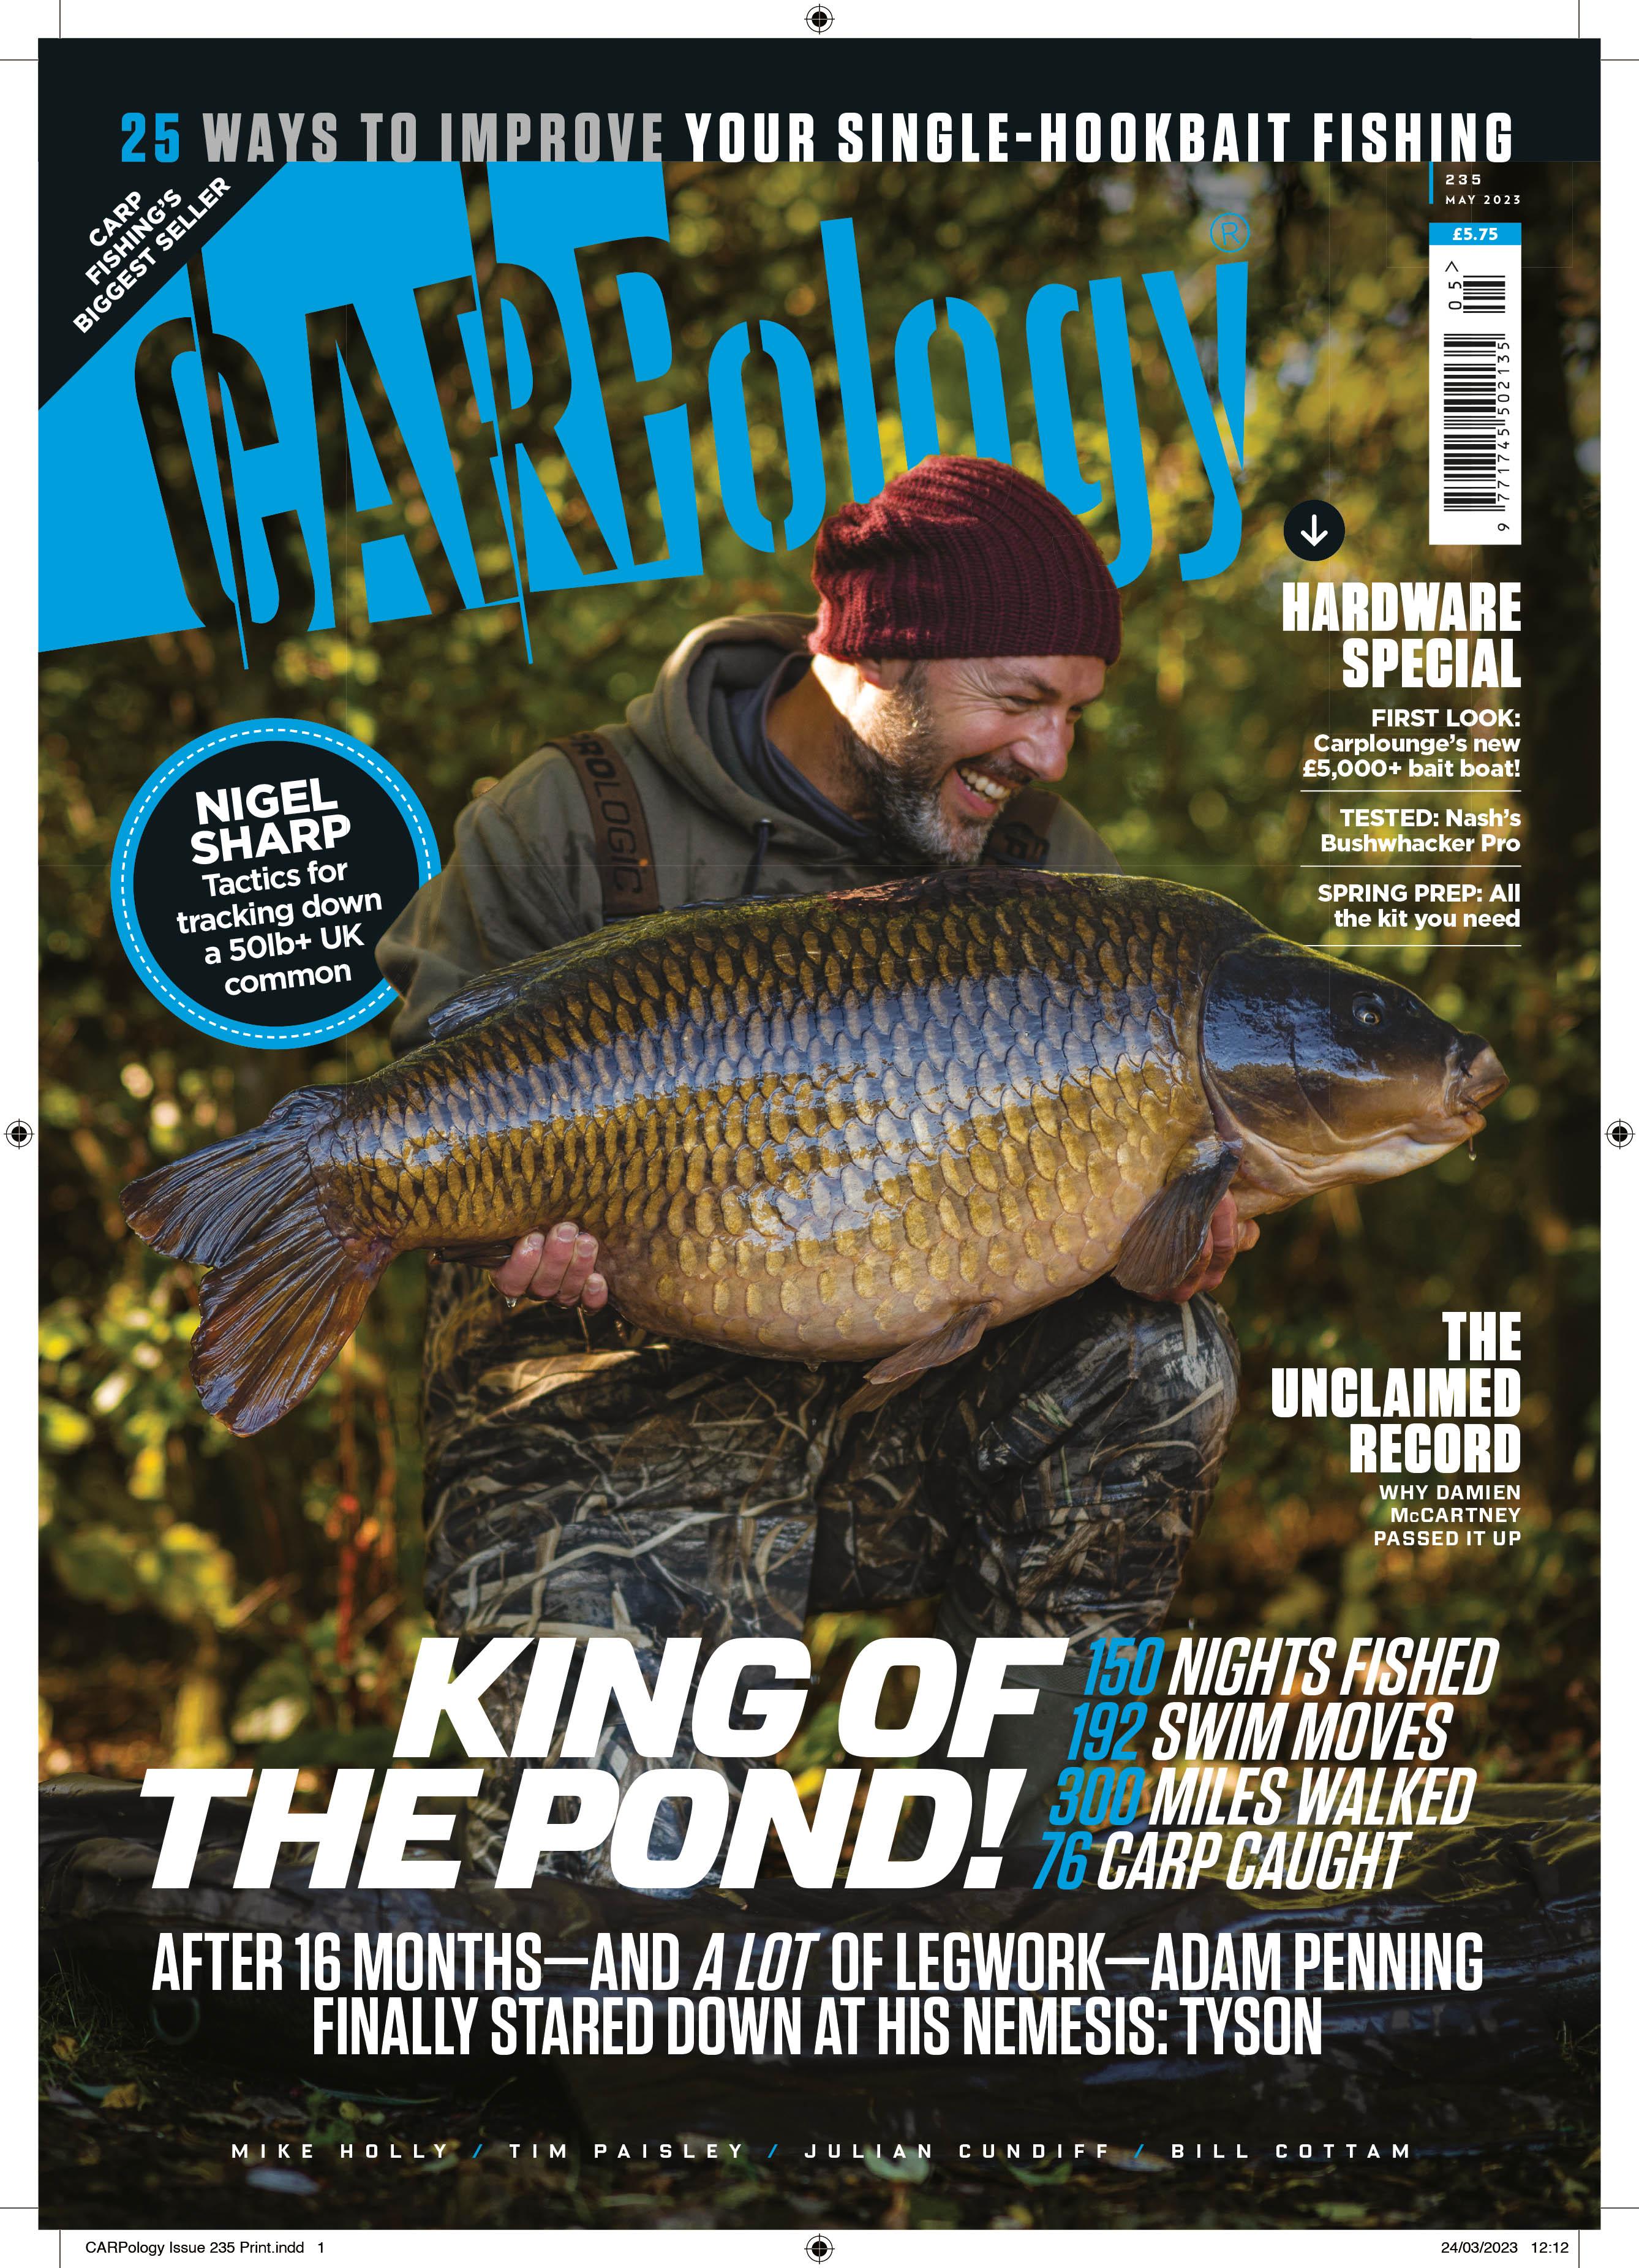 Carping Allegedly - August 23